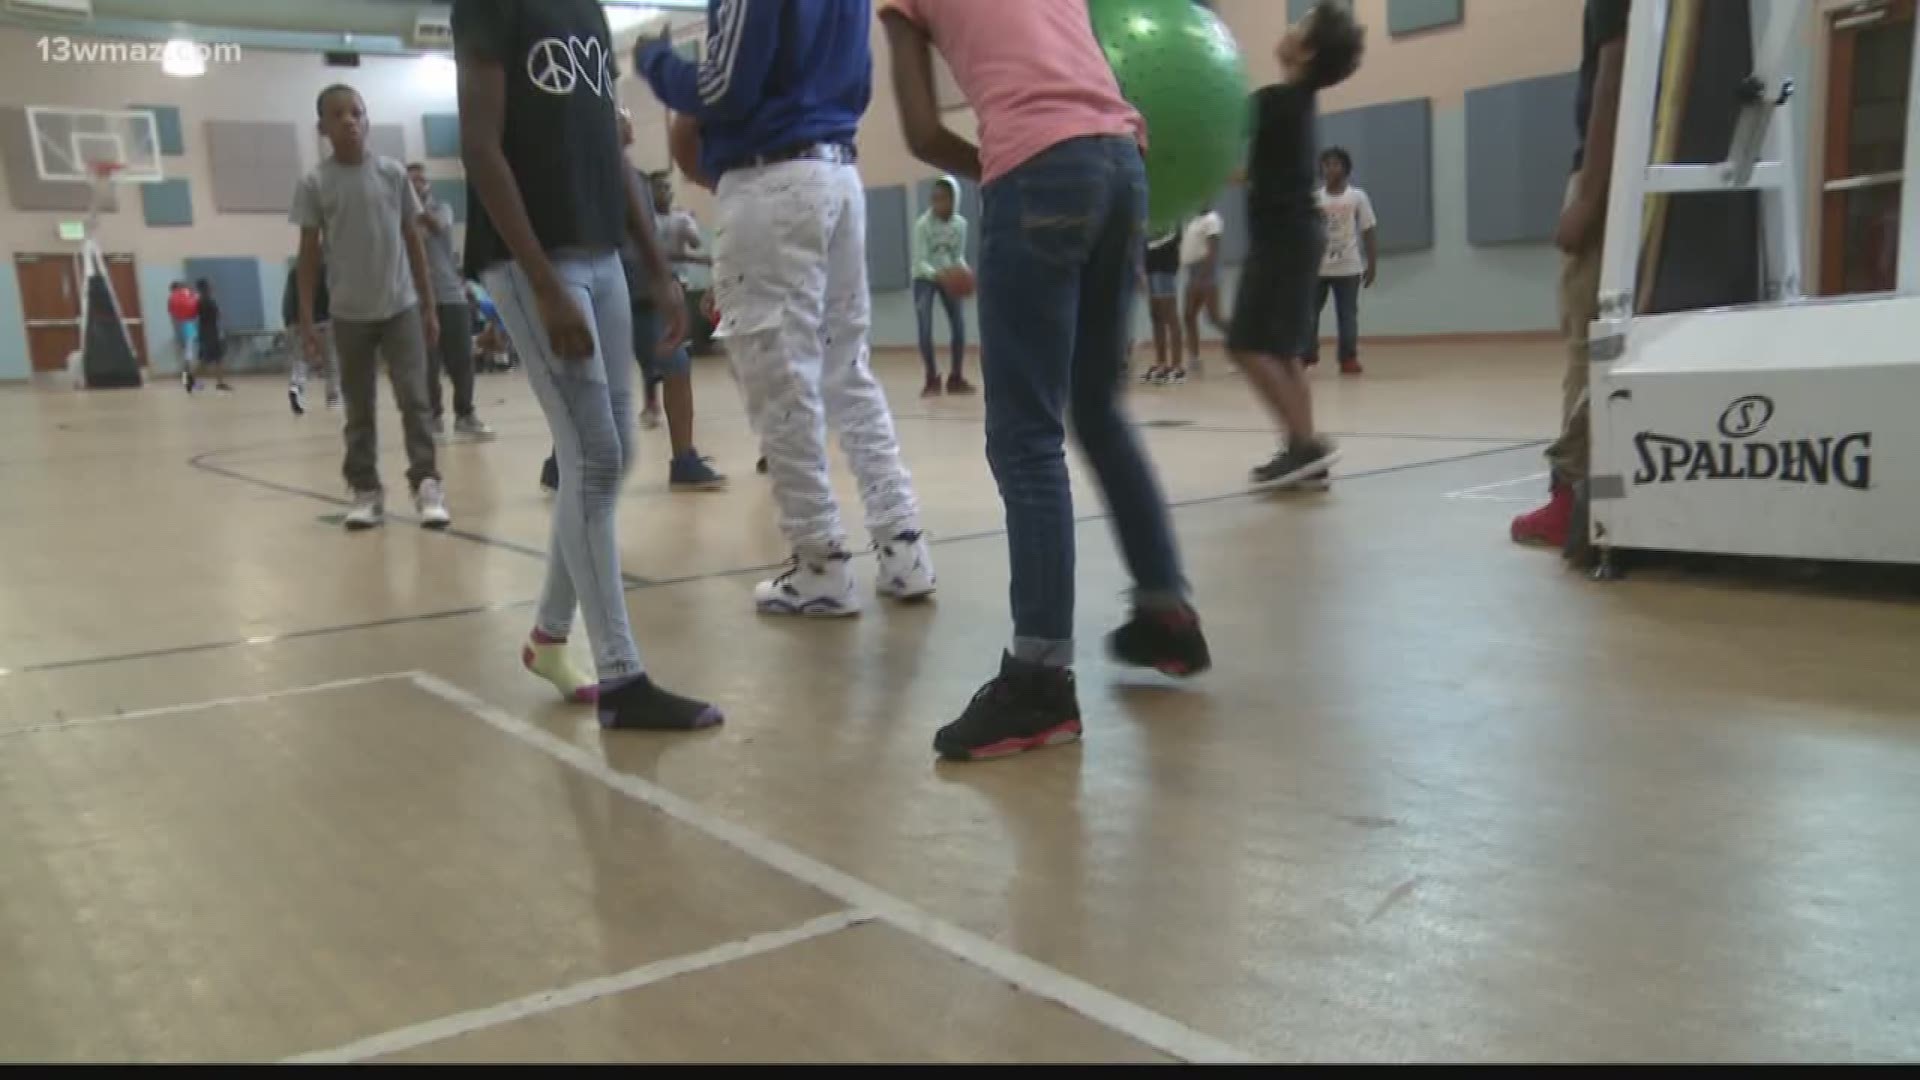 New agreement aims to help youth who commit minor crimes